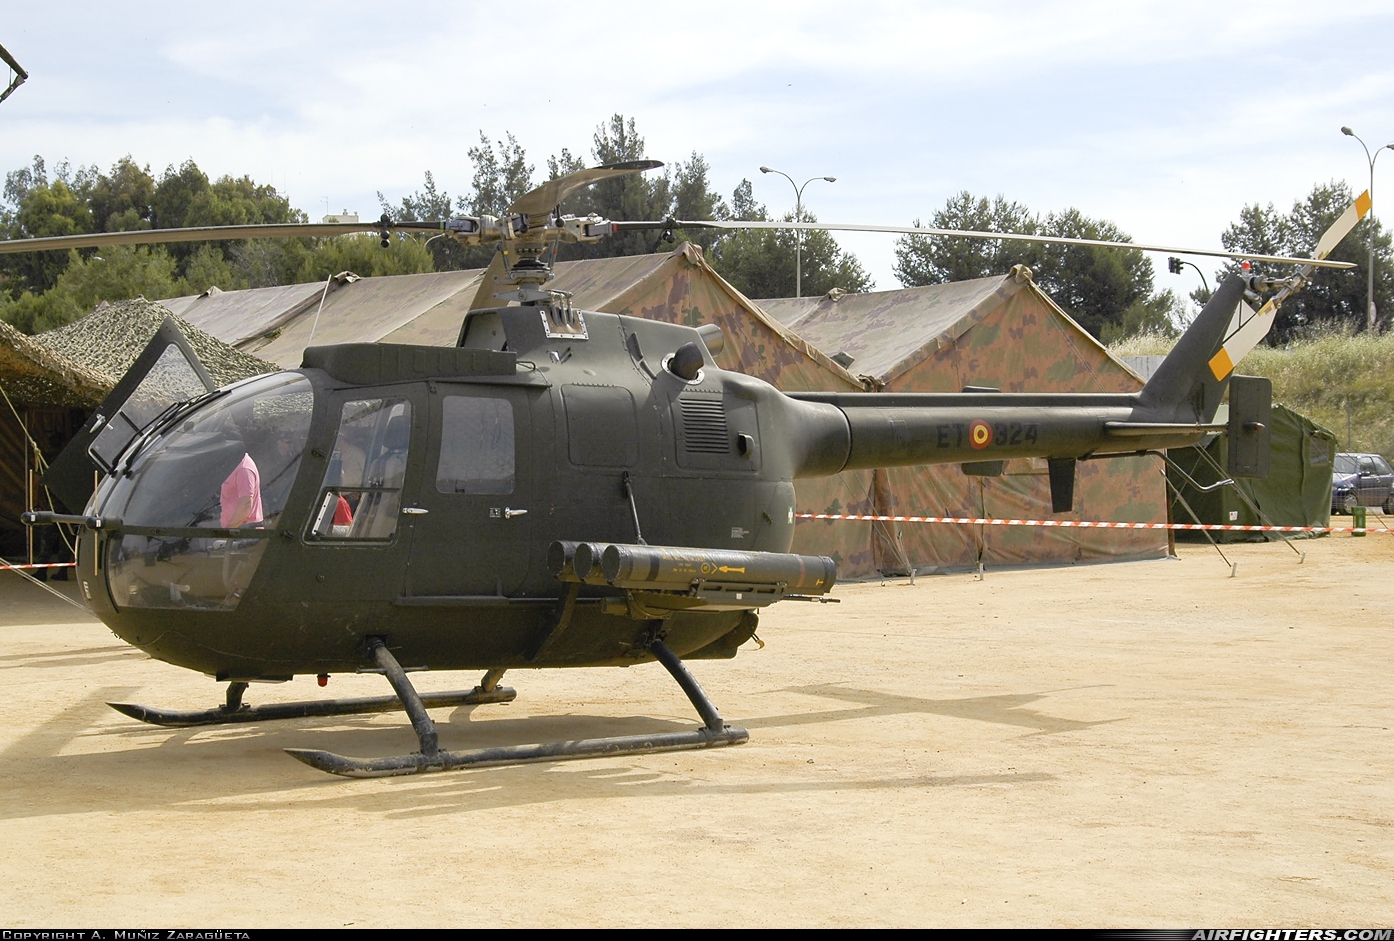 Spain - Army MBB Bo-105ATH HA.15-55 at Off-Airport - Seville, Spain